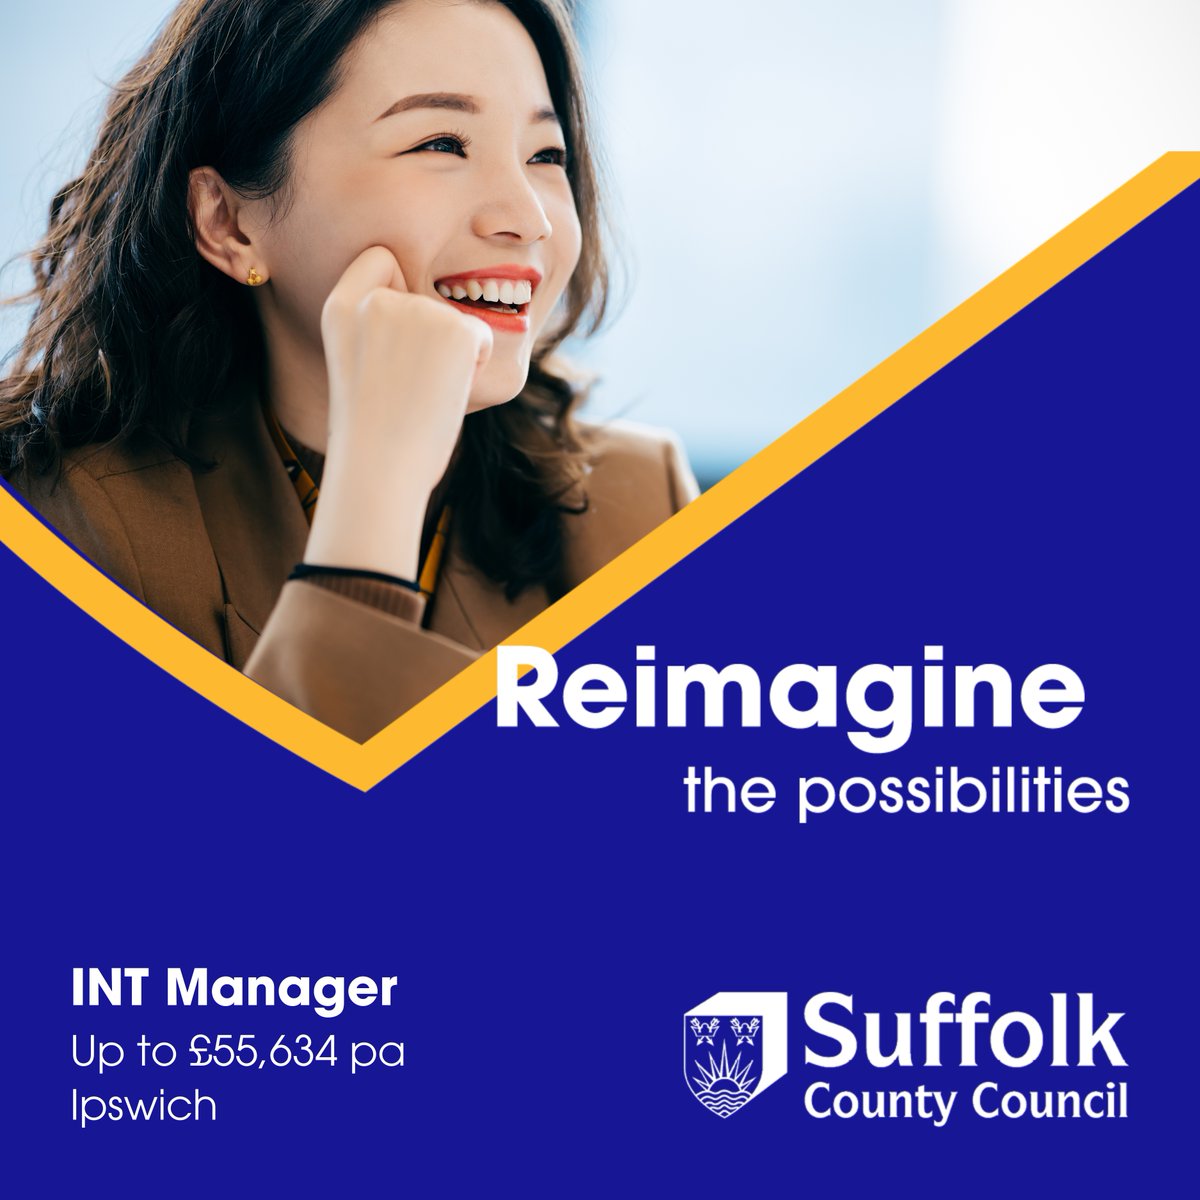 INT Manager
Suffolk County Council – Beacon House, Ipswich IP1 5PB - Hybrid

For more information and to apply for this job, please visit: suffolkjobsdirect.org/#en/sites/CX_1…

#IpswichJobs #suffolkjobs #suffolkjobsdirect @JCPInSuffolk